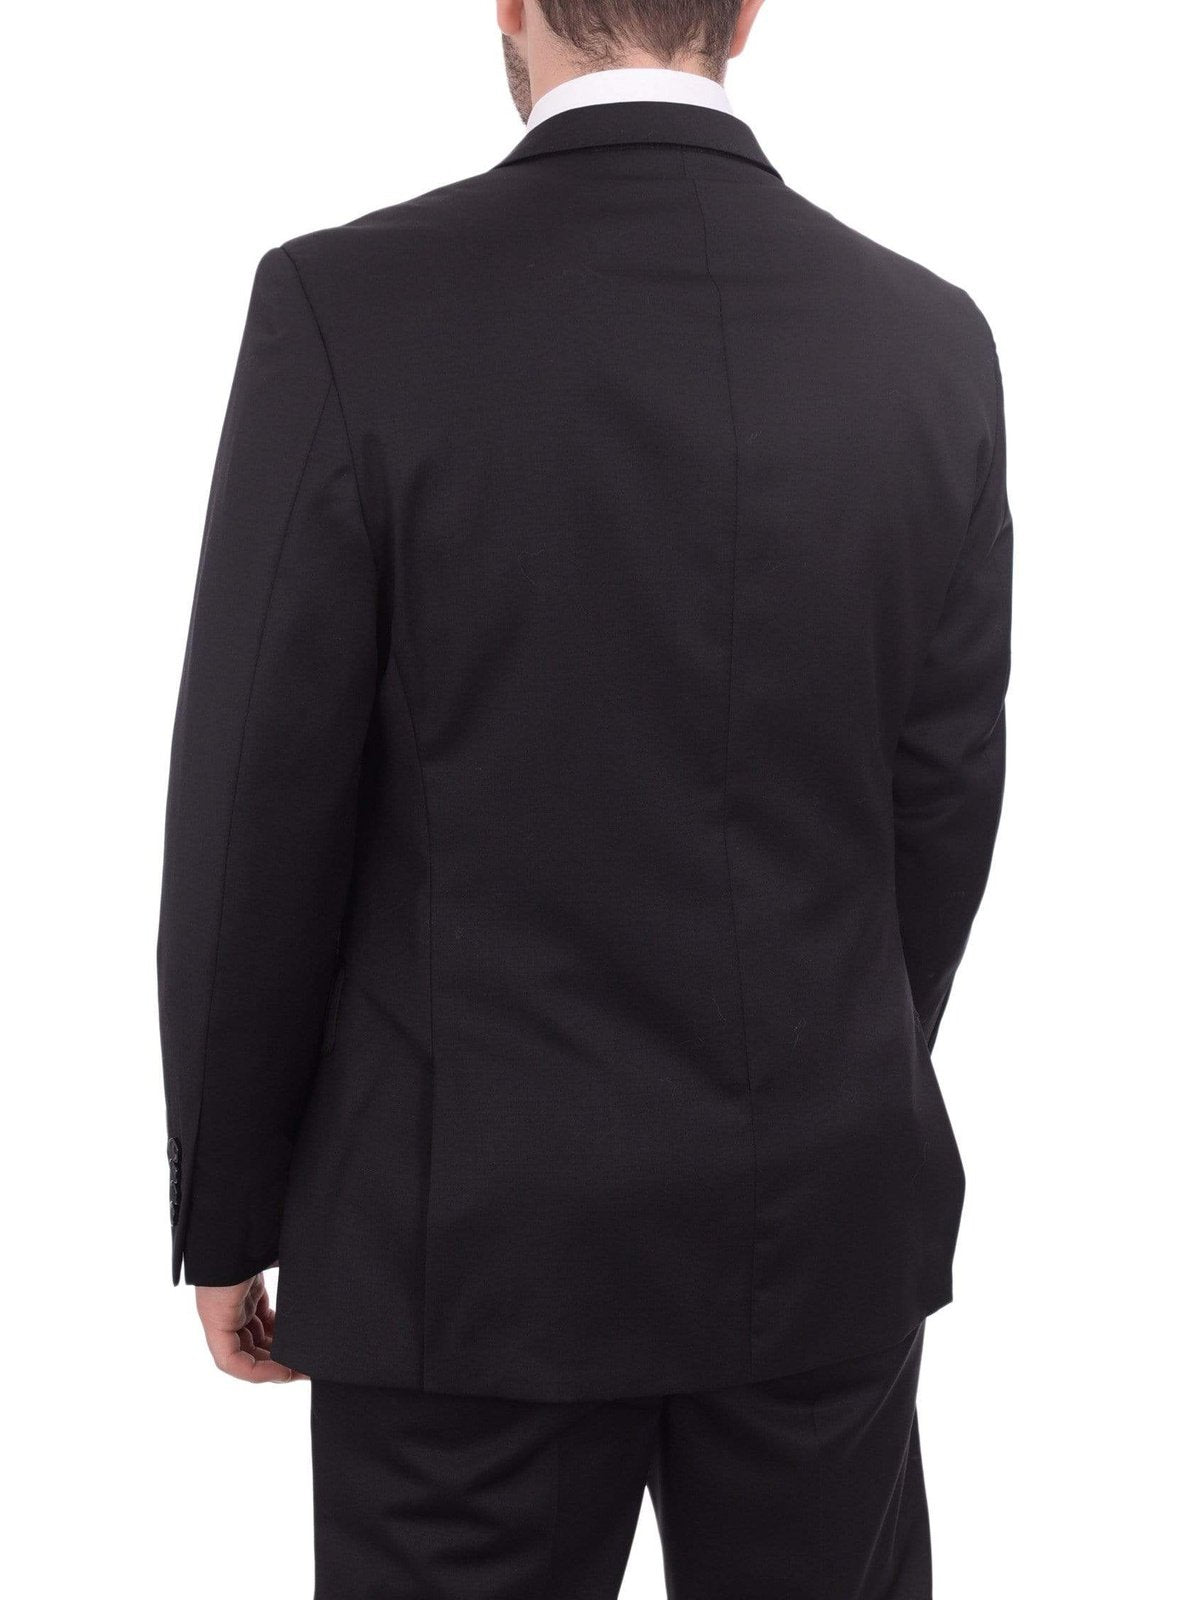 Giorgio Cosani TWO PIECE SUITS Giorgio Cosani Regular Fit Solid Black Two Button Wool Suit